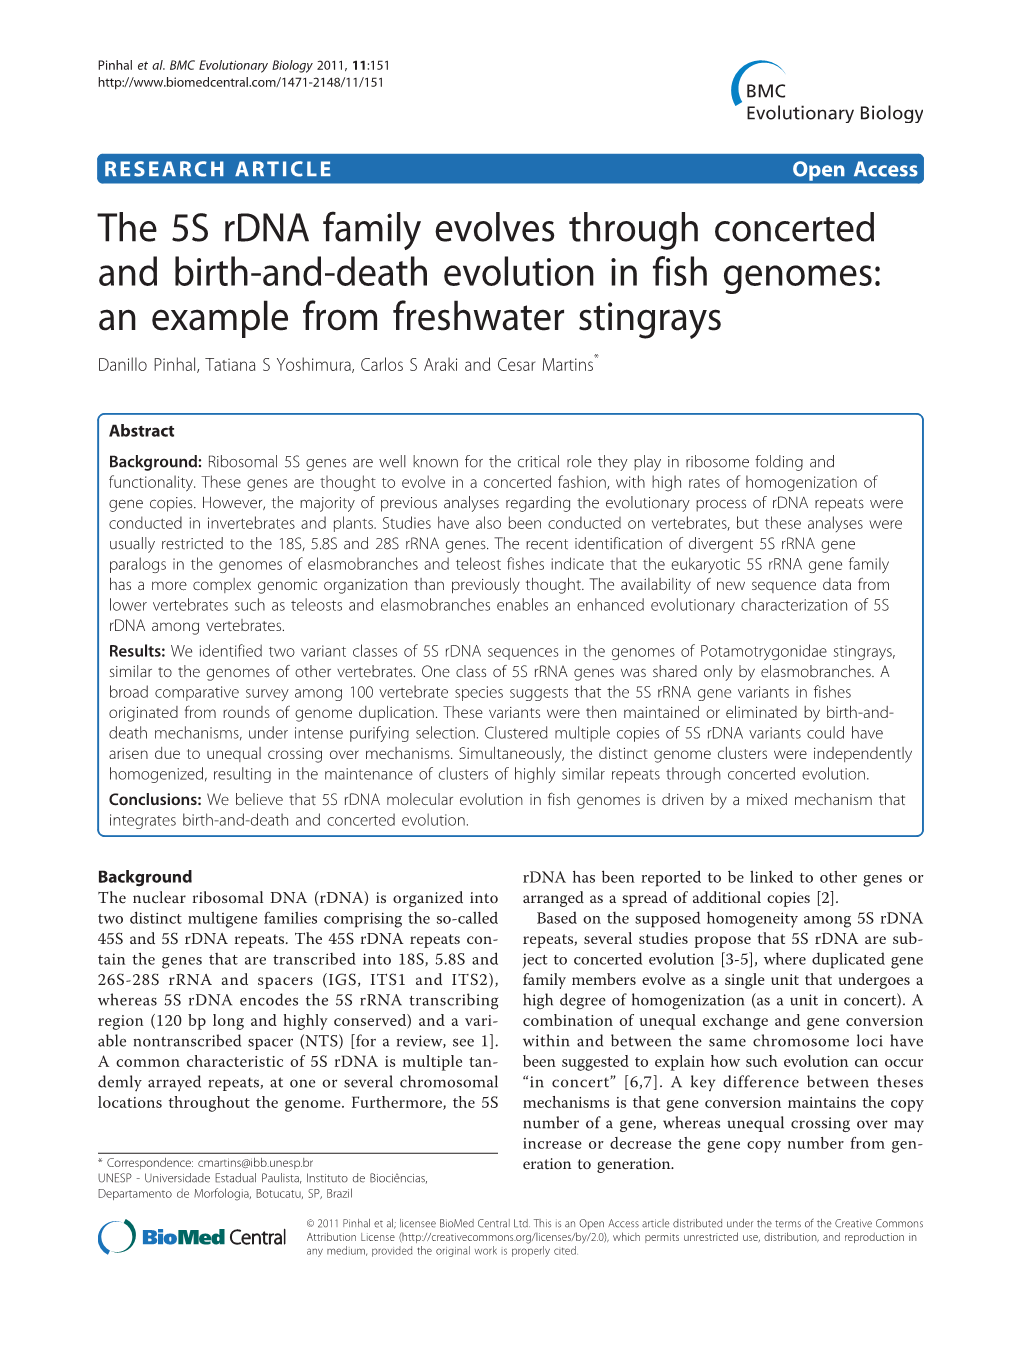 The 5S Rdna Family Evolves Through Concerted and Birth-And-Death